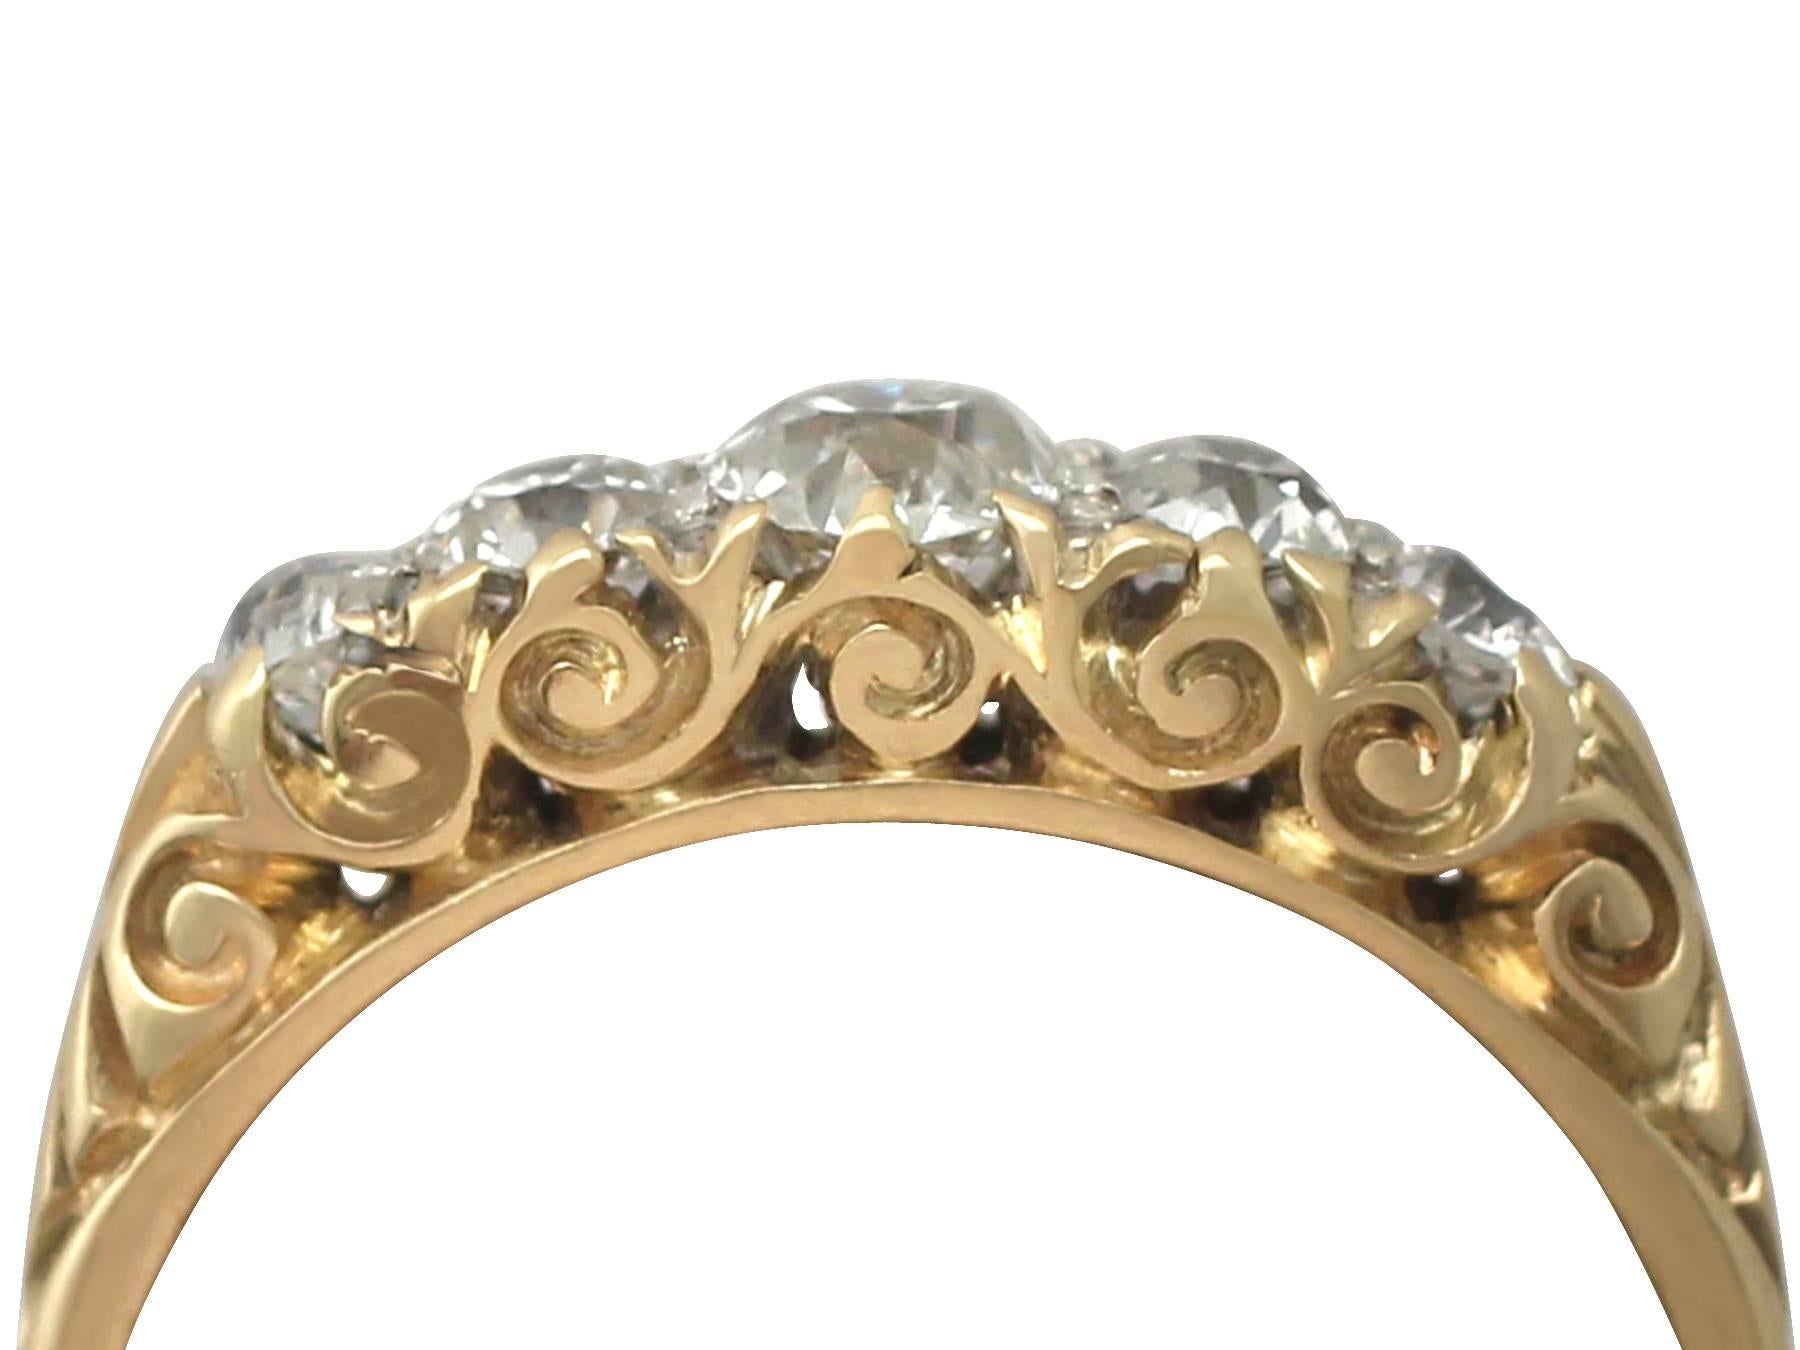 A fine and impressive antique 0.72 carat diamond (total) 18k yellow gold five stone ring; part of our diverse antique jewellery and estate jewelry collections

This fine and impressive antique multi-stone diamond ring has been crafted in 18k